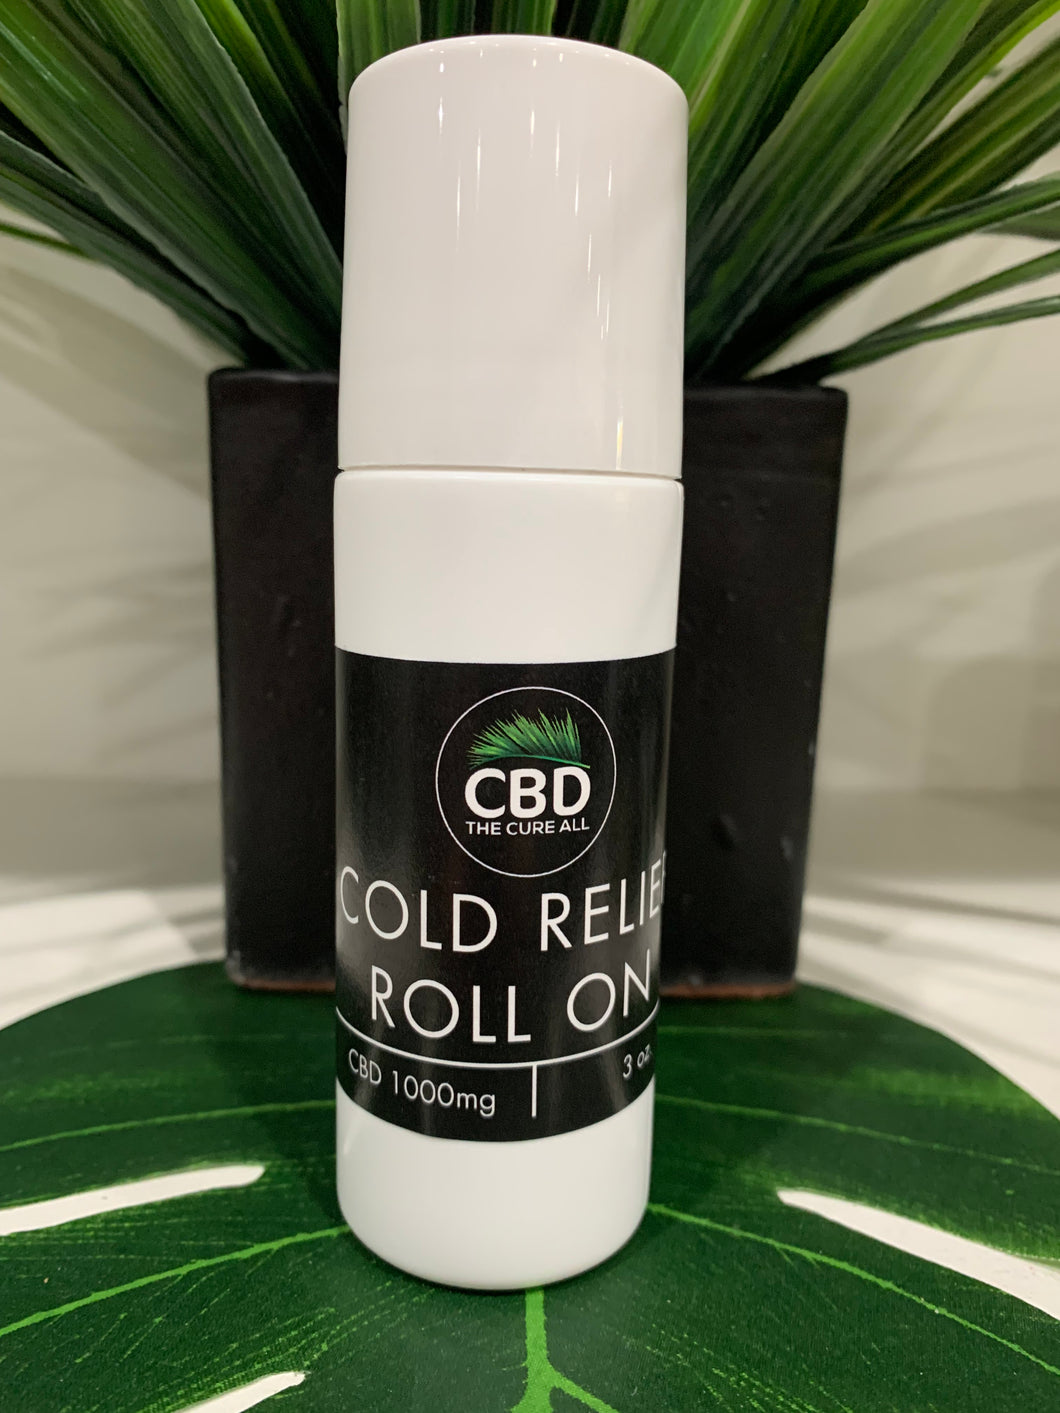 1 TOPICAL PAIN CBD 1000MG ROLL ON PAIN RELIEF